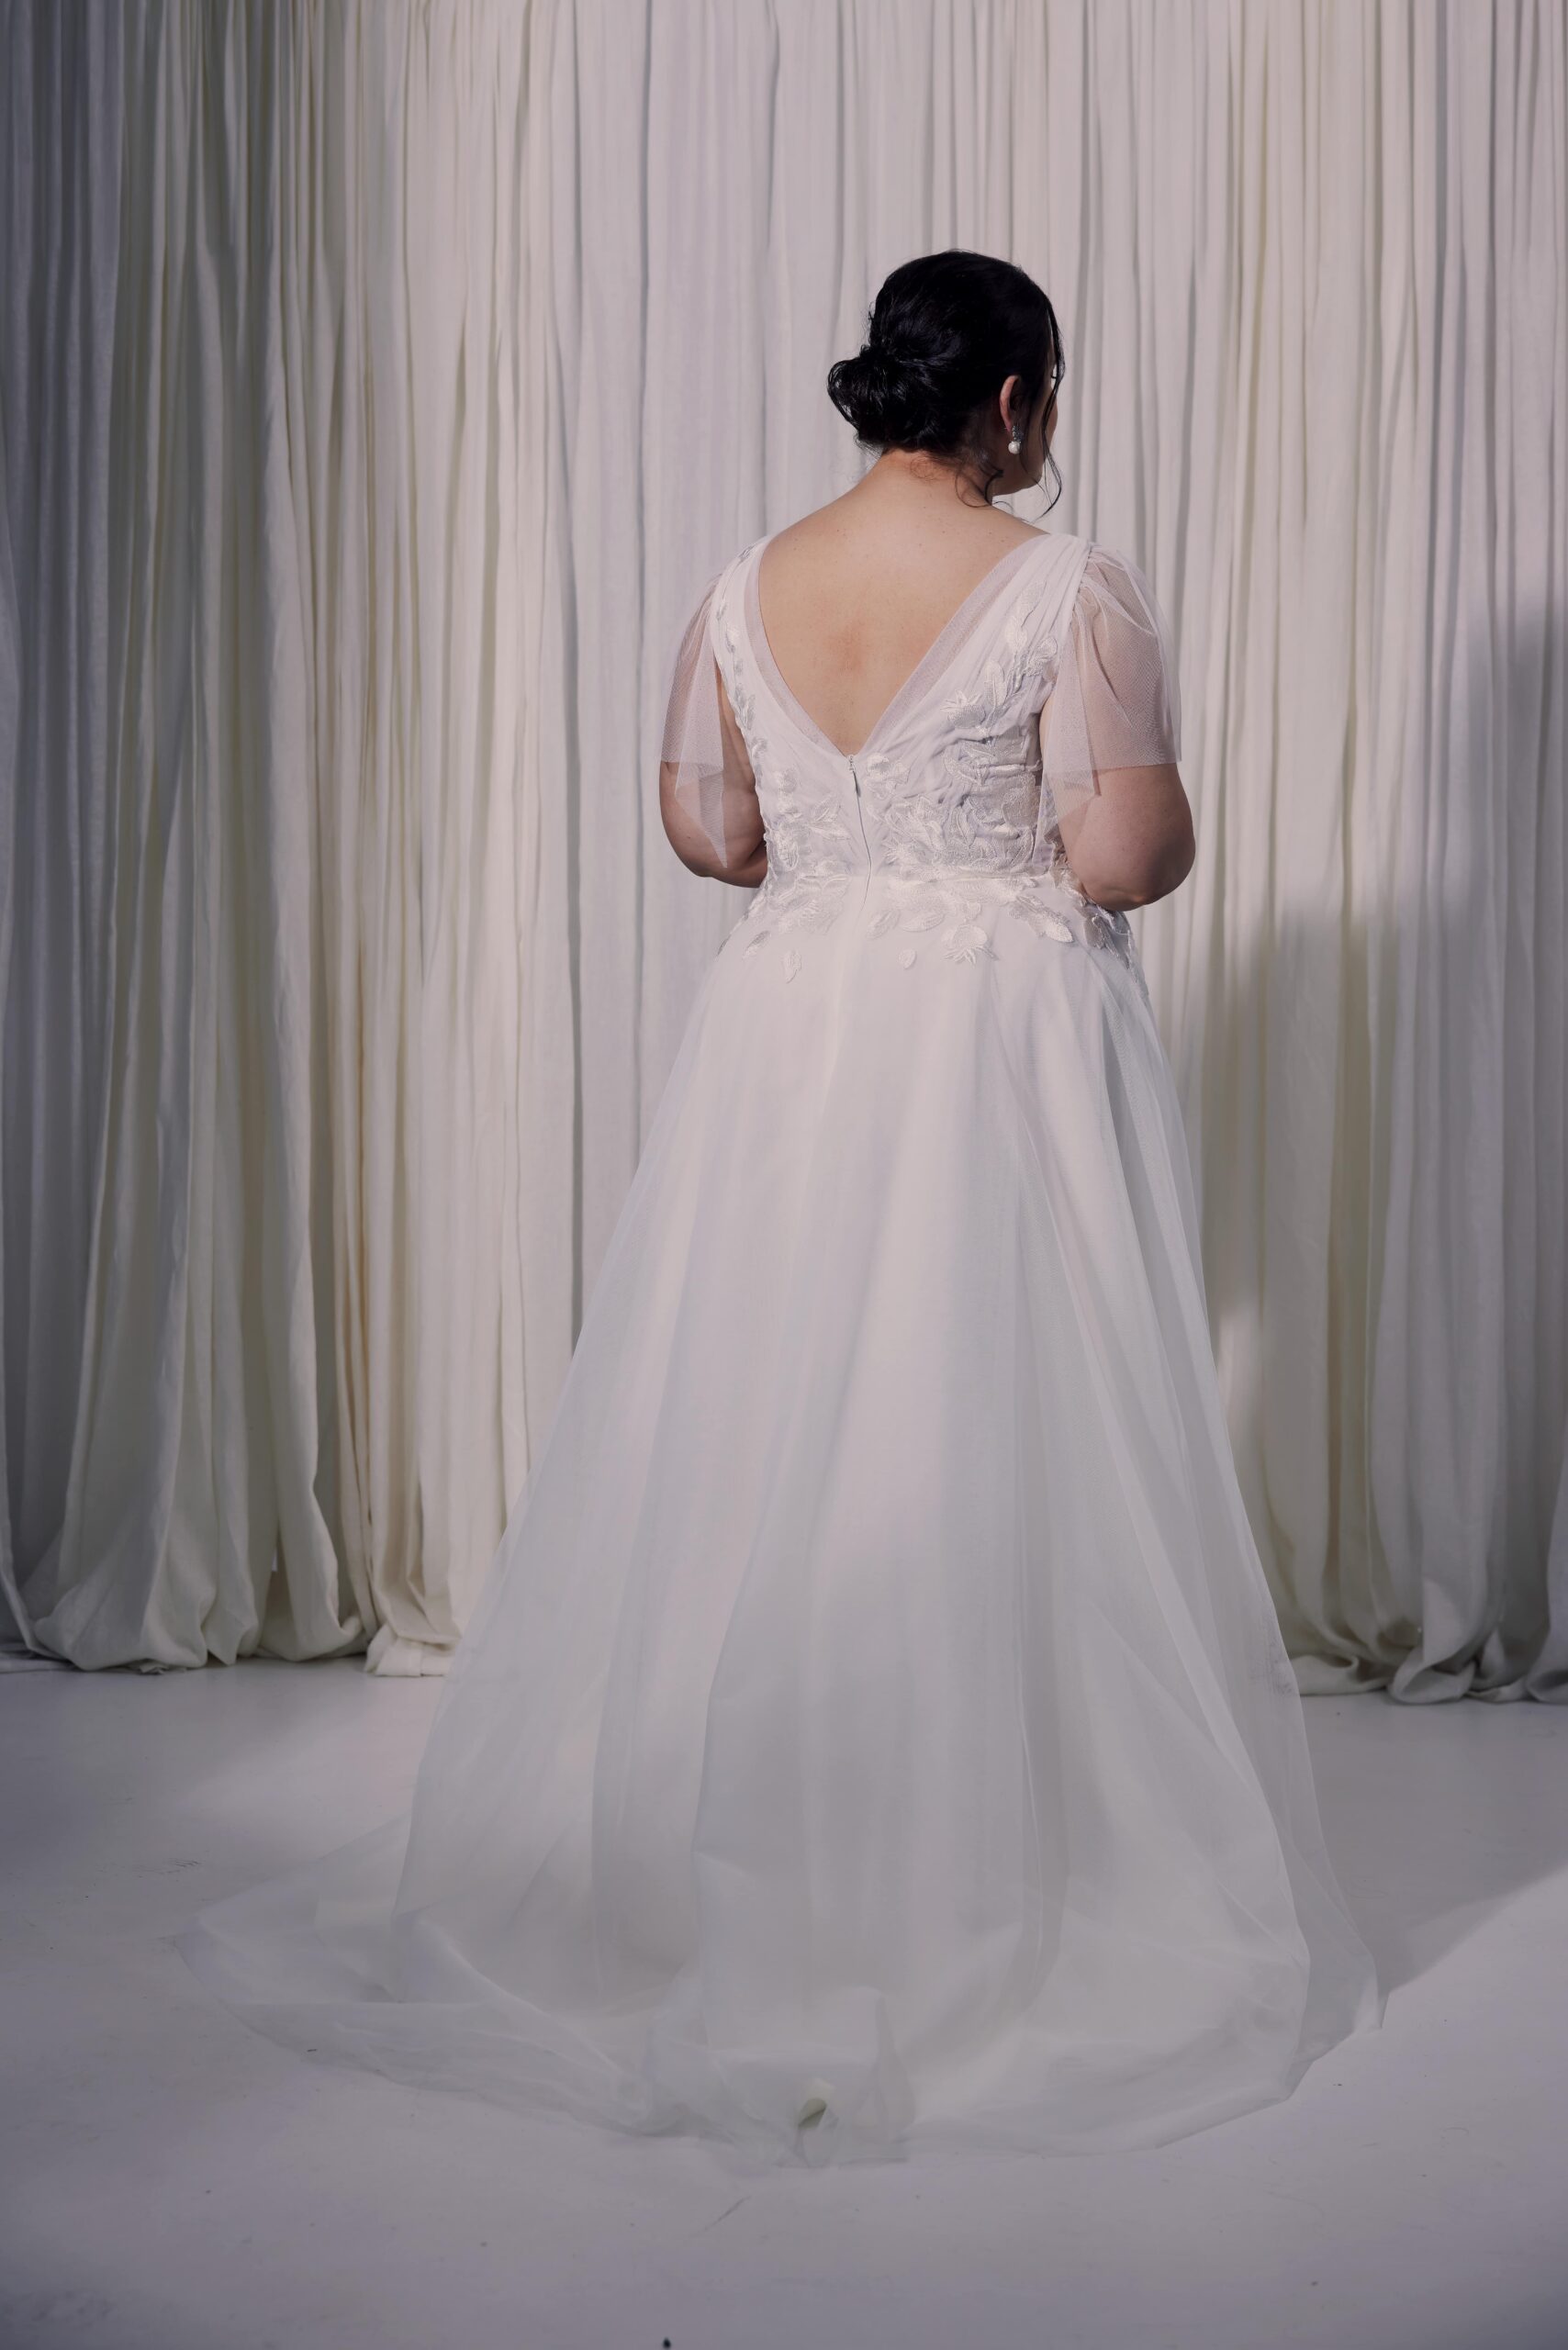 The Ella gown - a V-neck soft tulle gown with flutter sleeves and embroidered lace applique trailing into a soft flowing skirt.